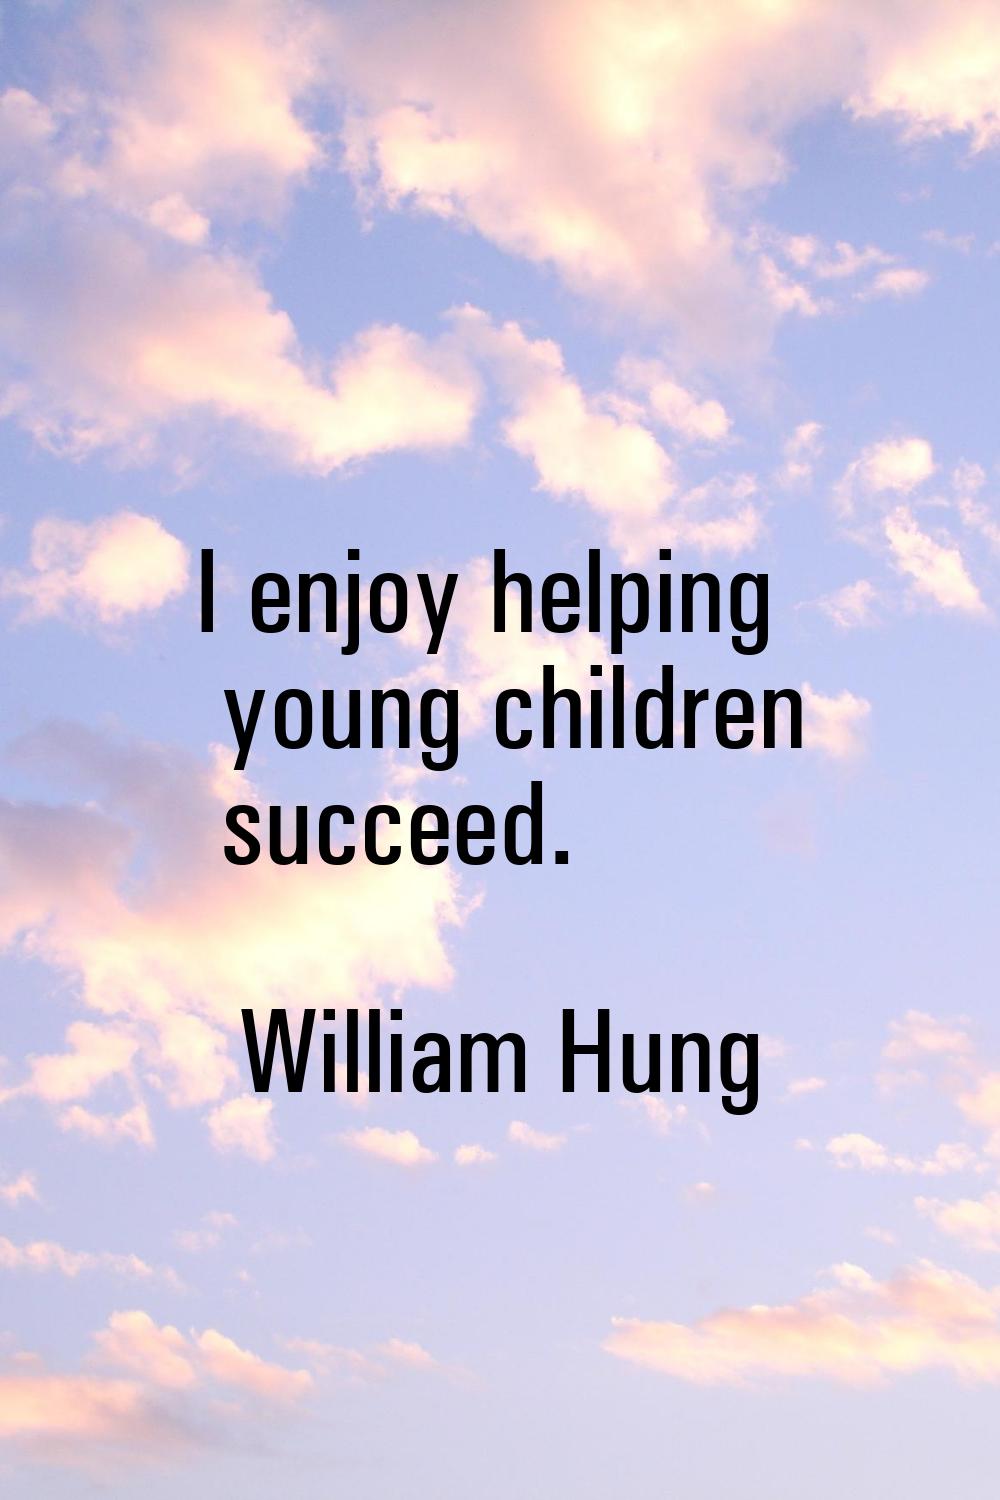 I enjoy helping young children succeed.